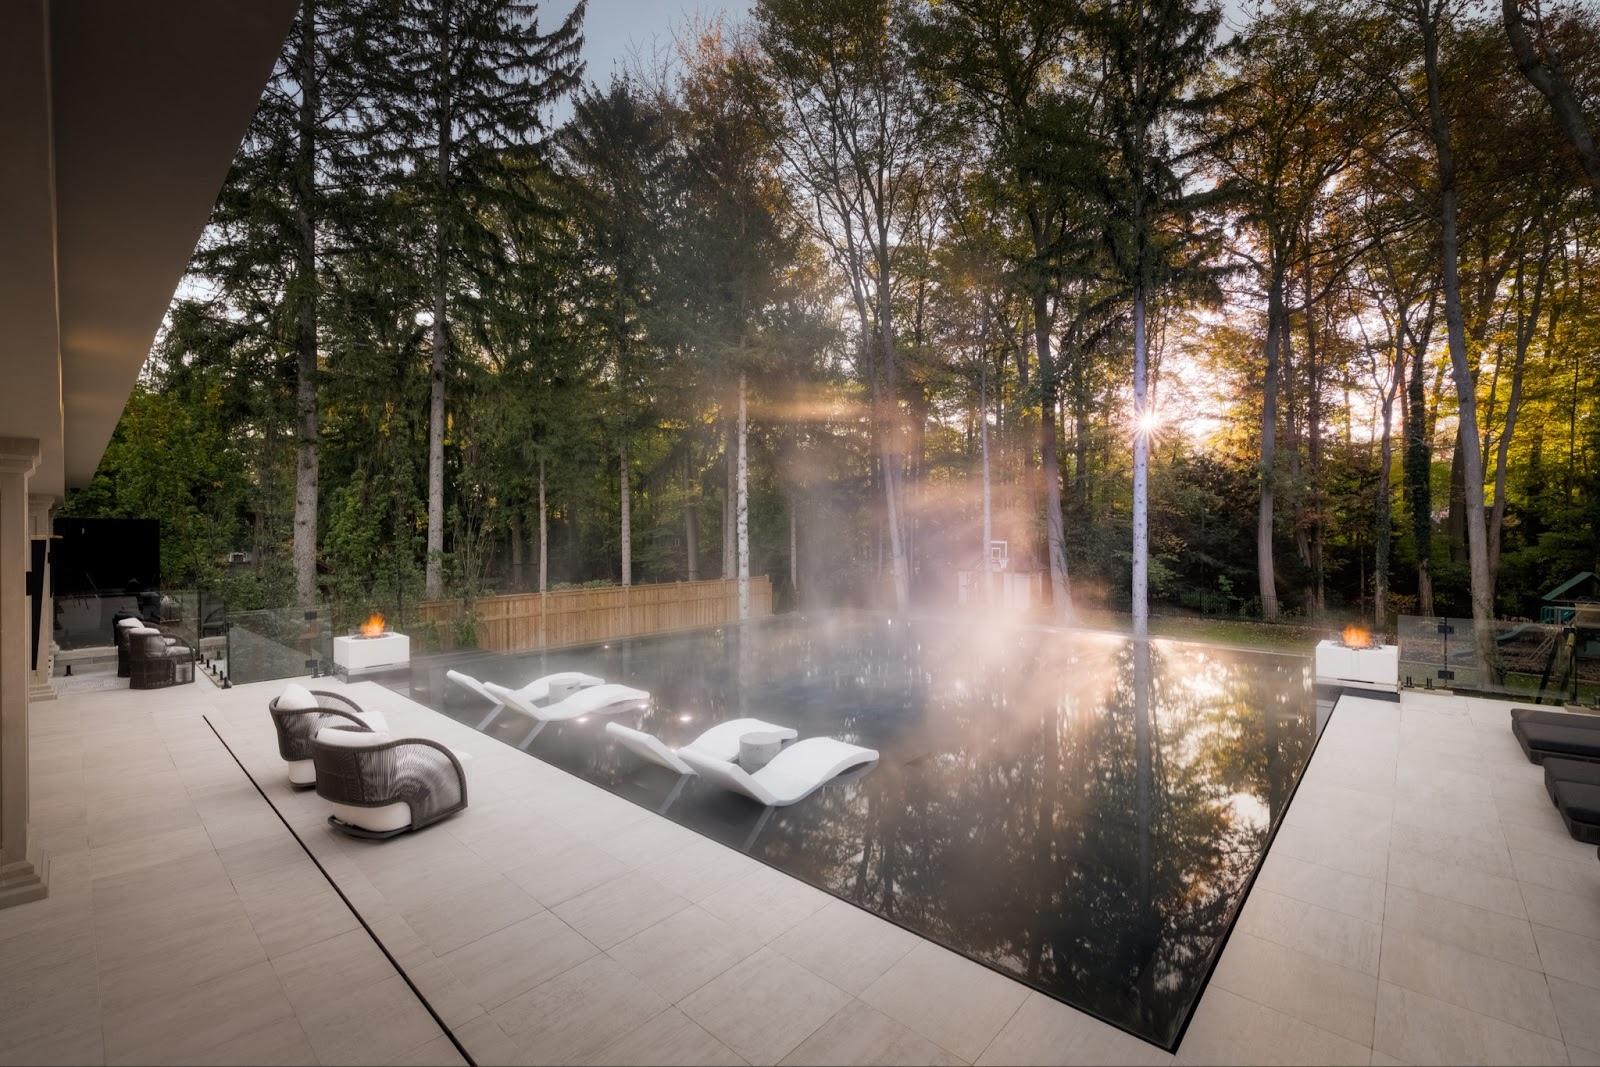 This poolside seating area has two square-shaped fire pits.